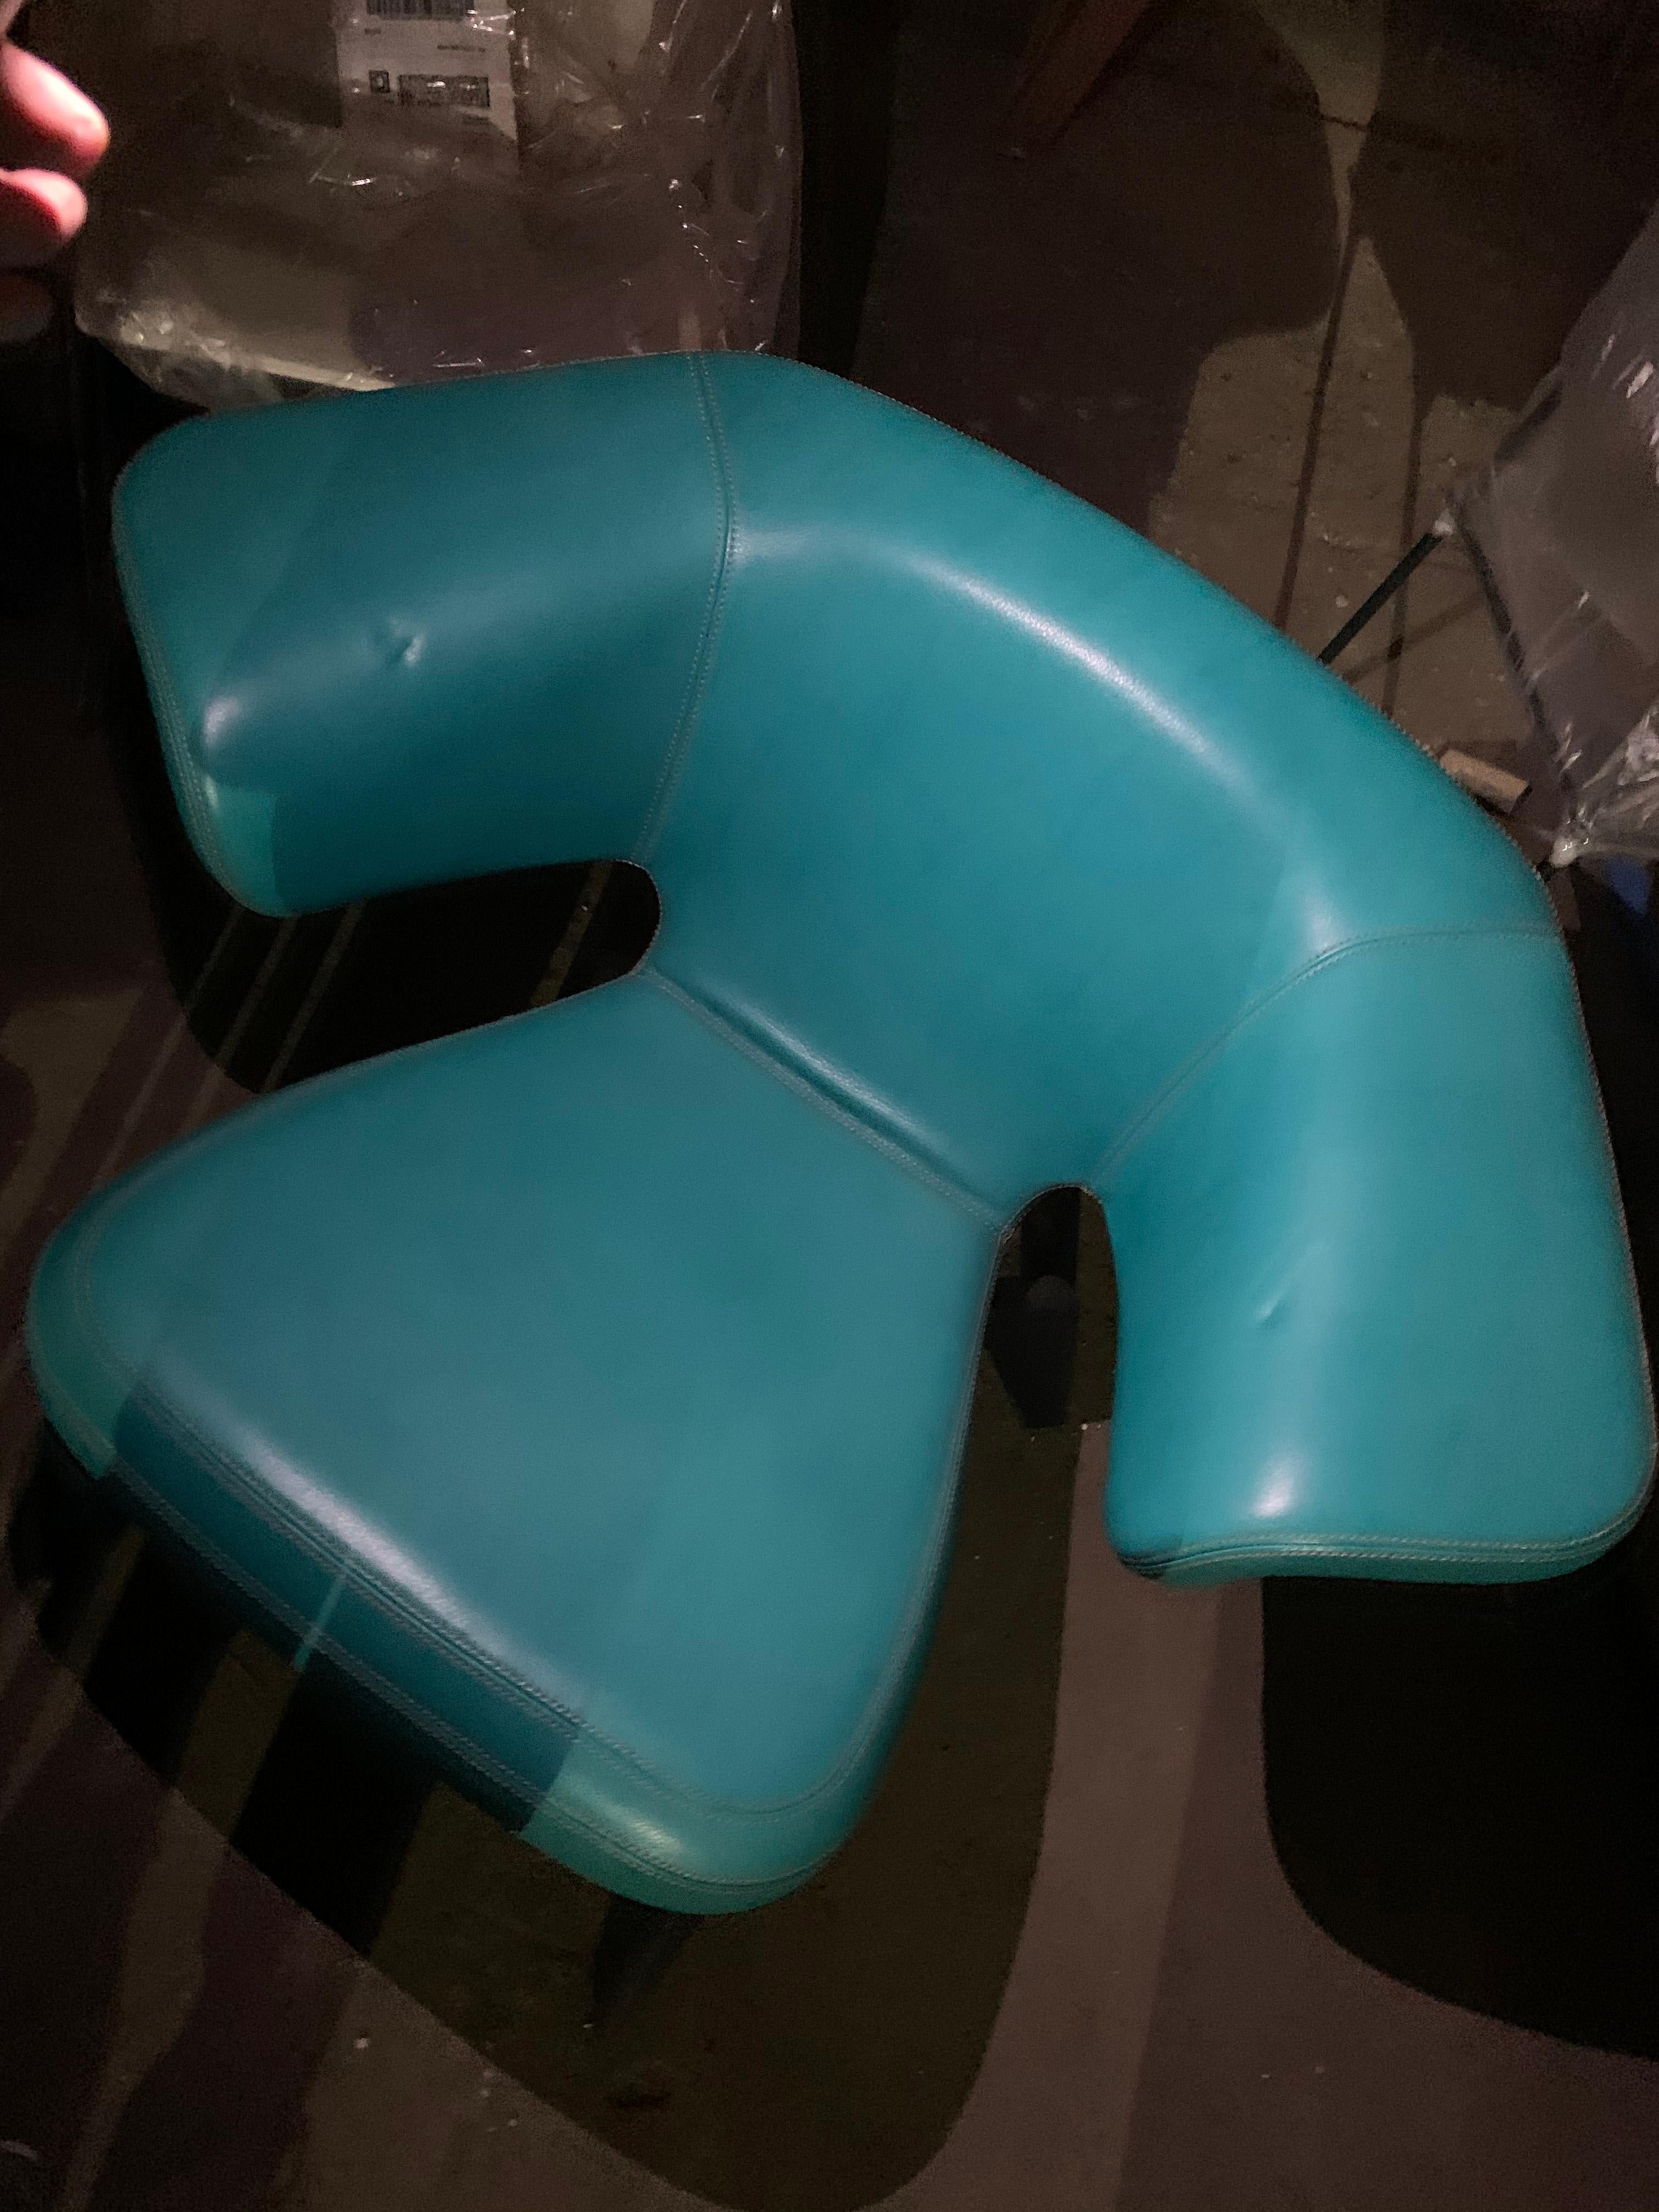 German ClassiCon Turquoise Munich Lounge Chair Designed by Sauerbruch Hutton in STOCK For Sale